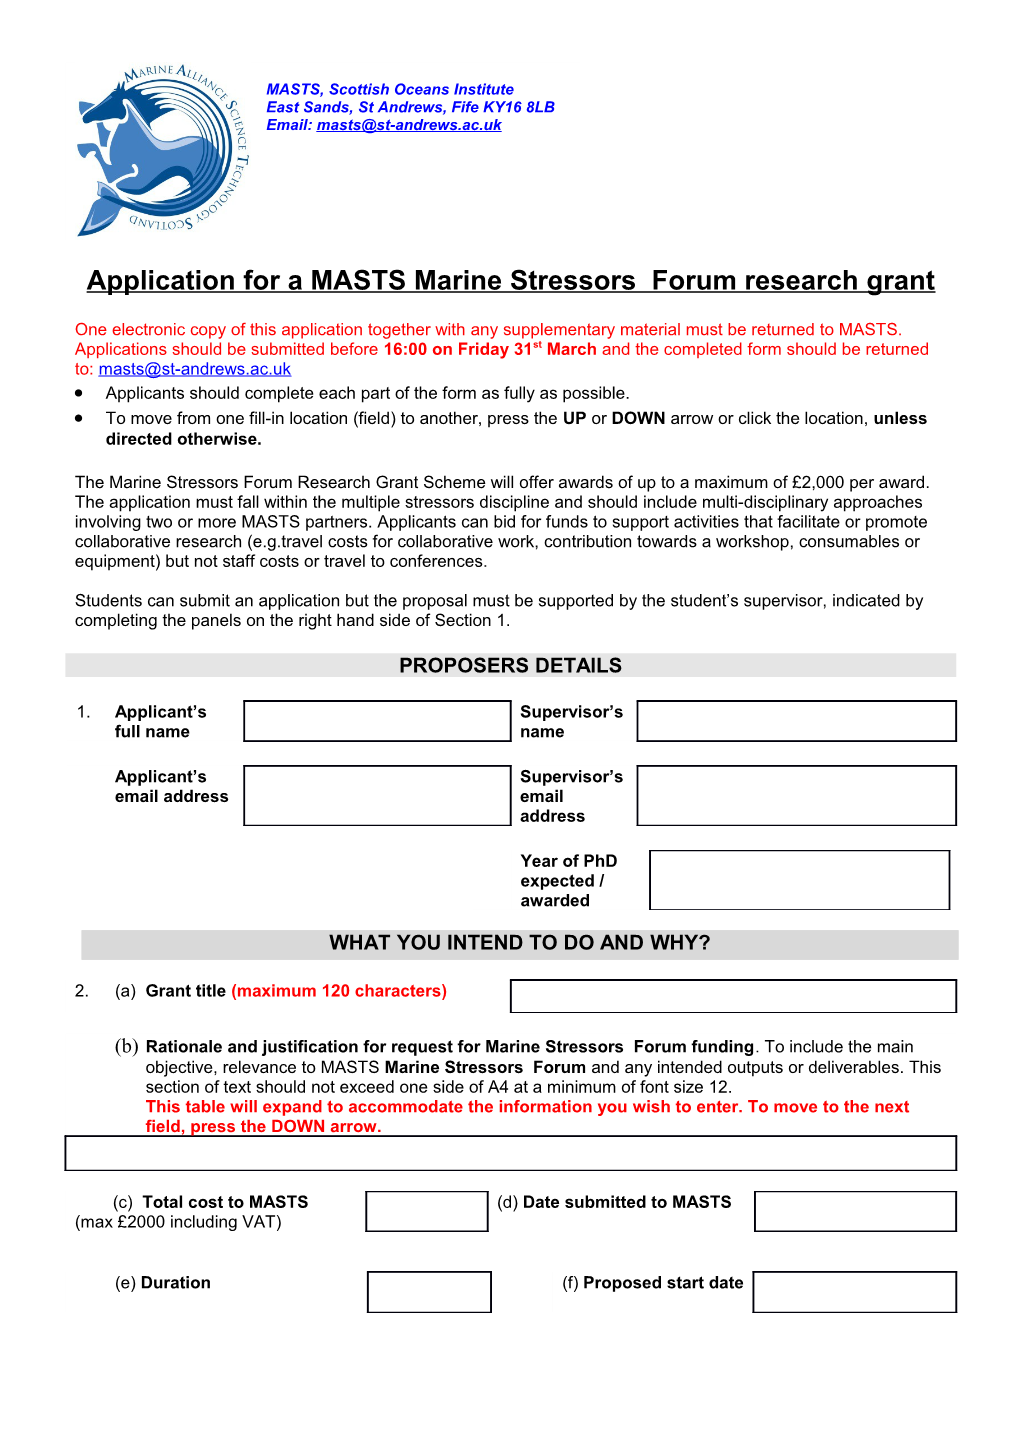 Application for a Mastsmarine Stressors Forumresearch Grant